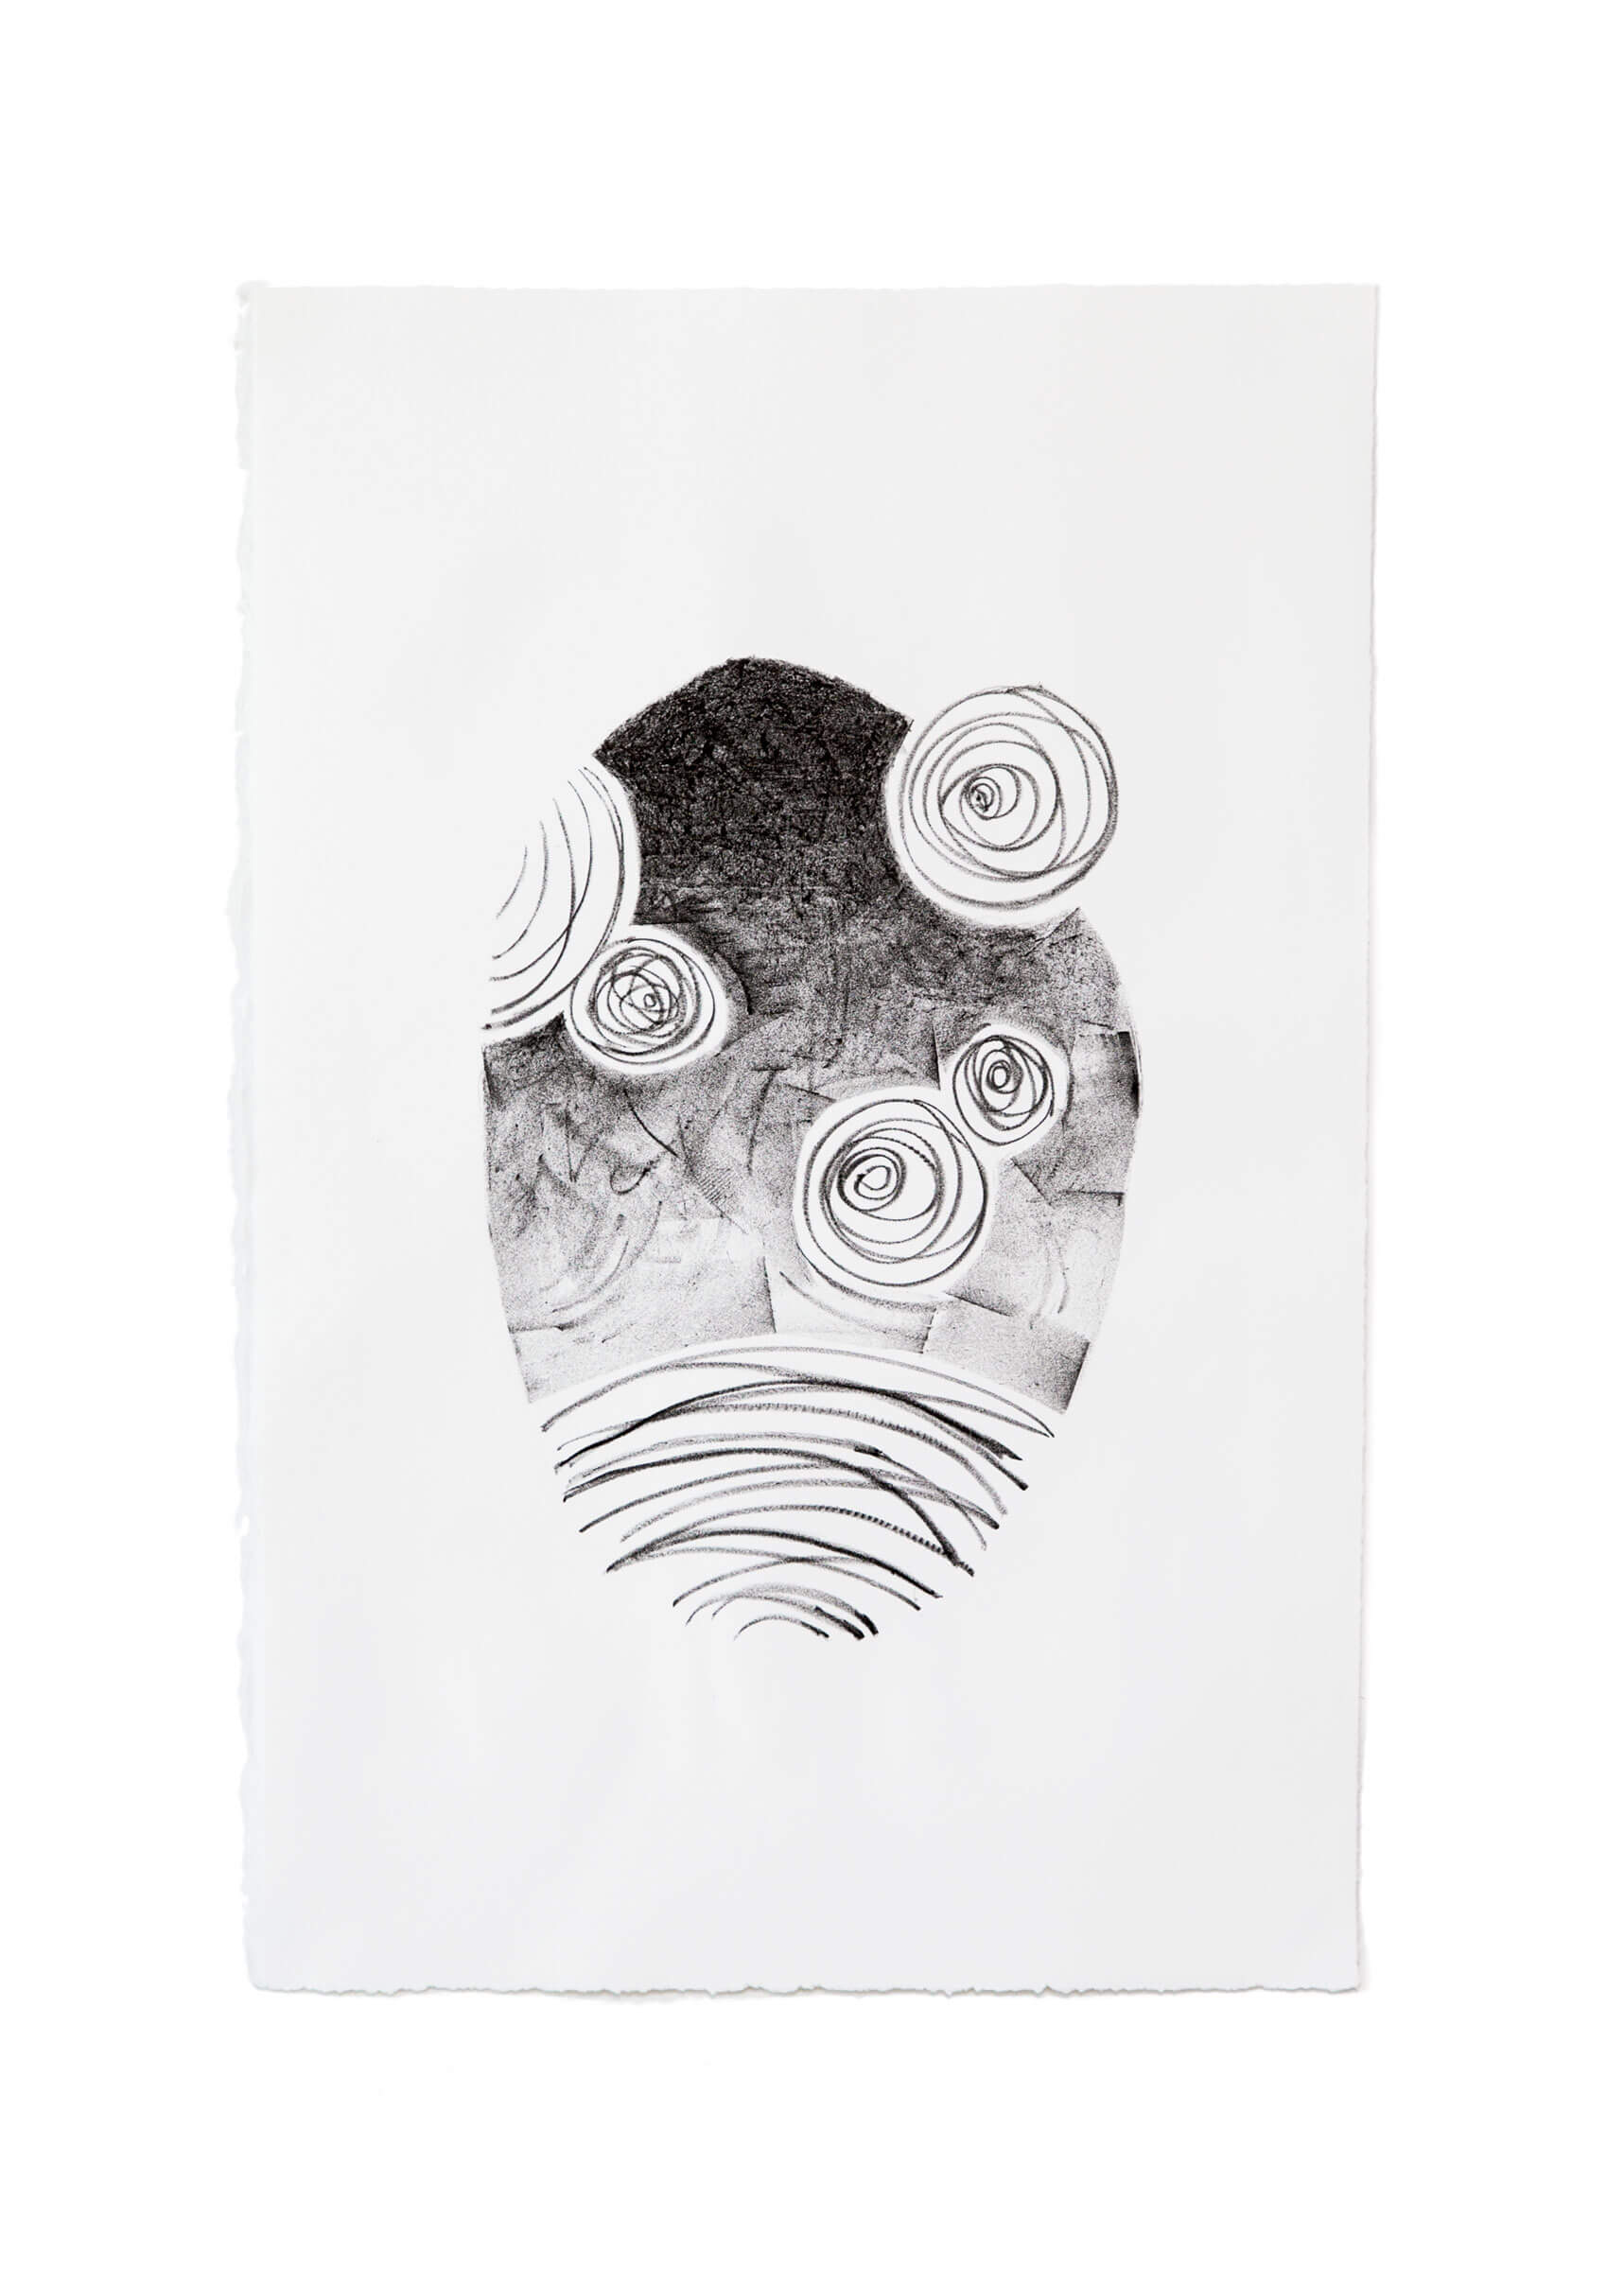 Space I - Lithograph by Emily ! Duong